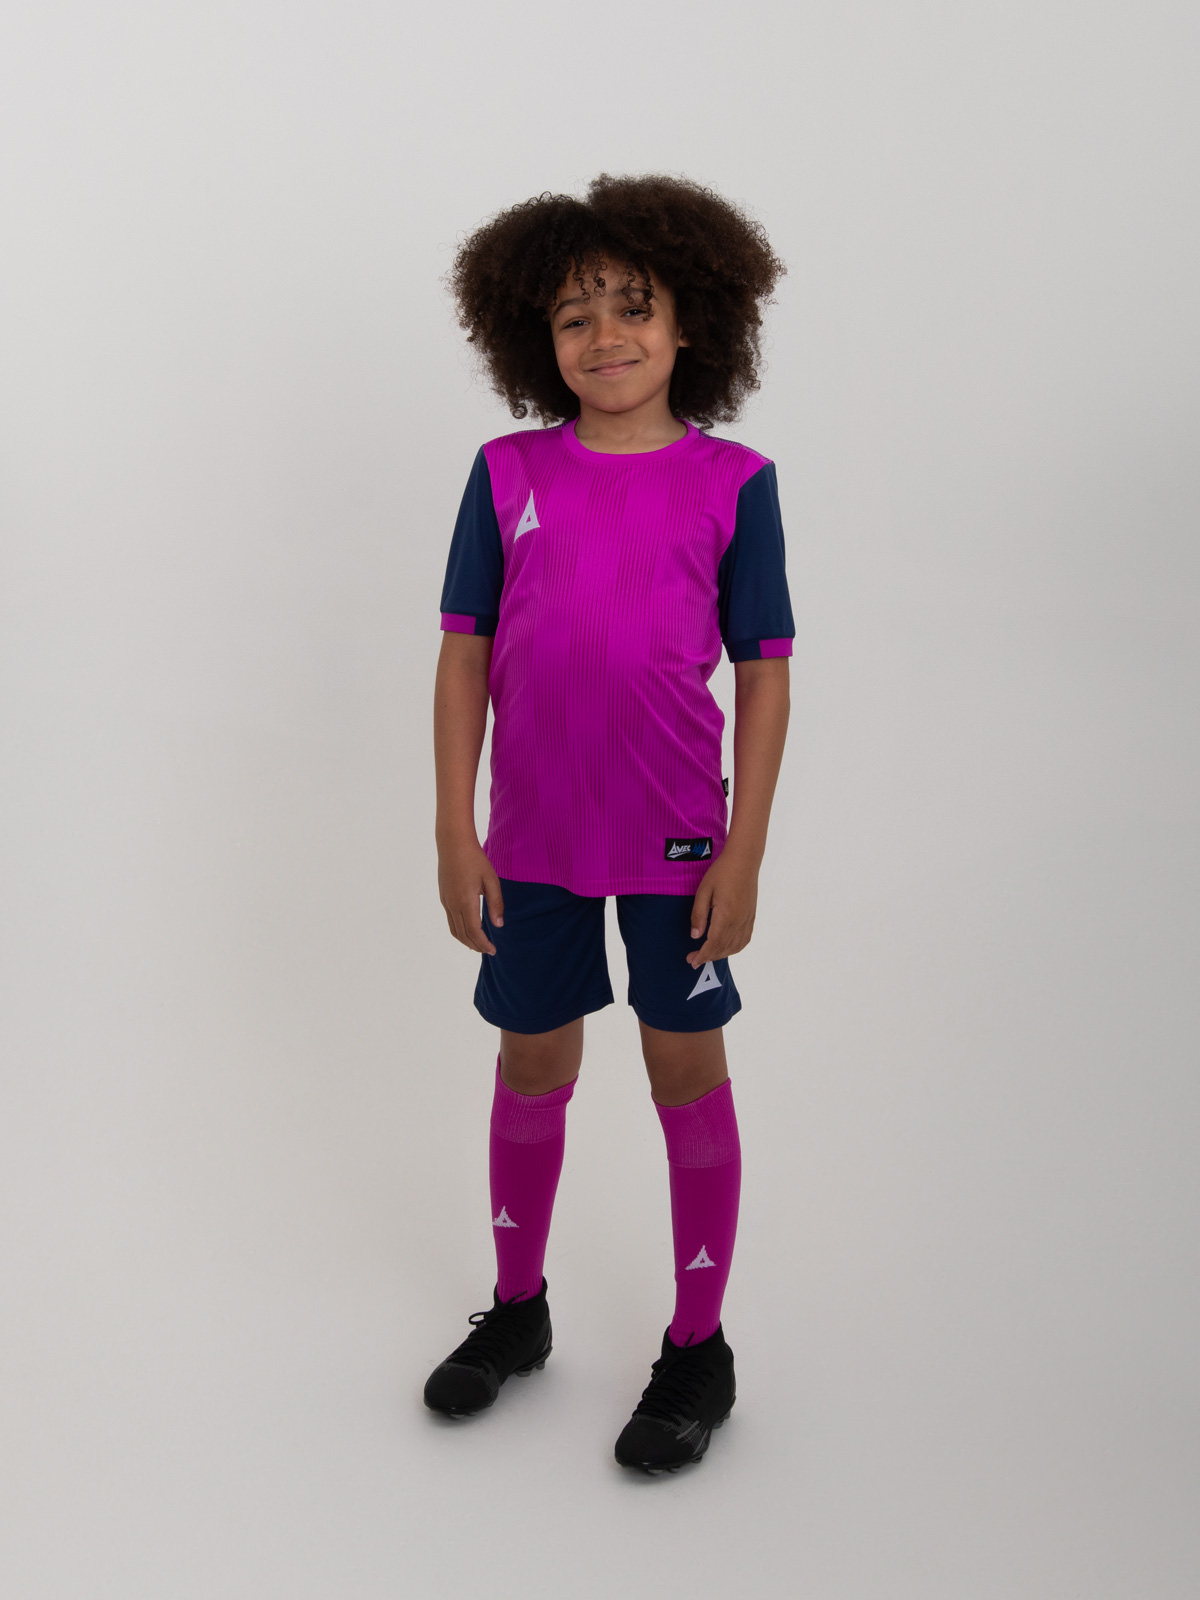 a kid is wearing a purple football shirt with navy shorts and socks. the shirt has a two-tone graphic print on it